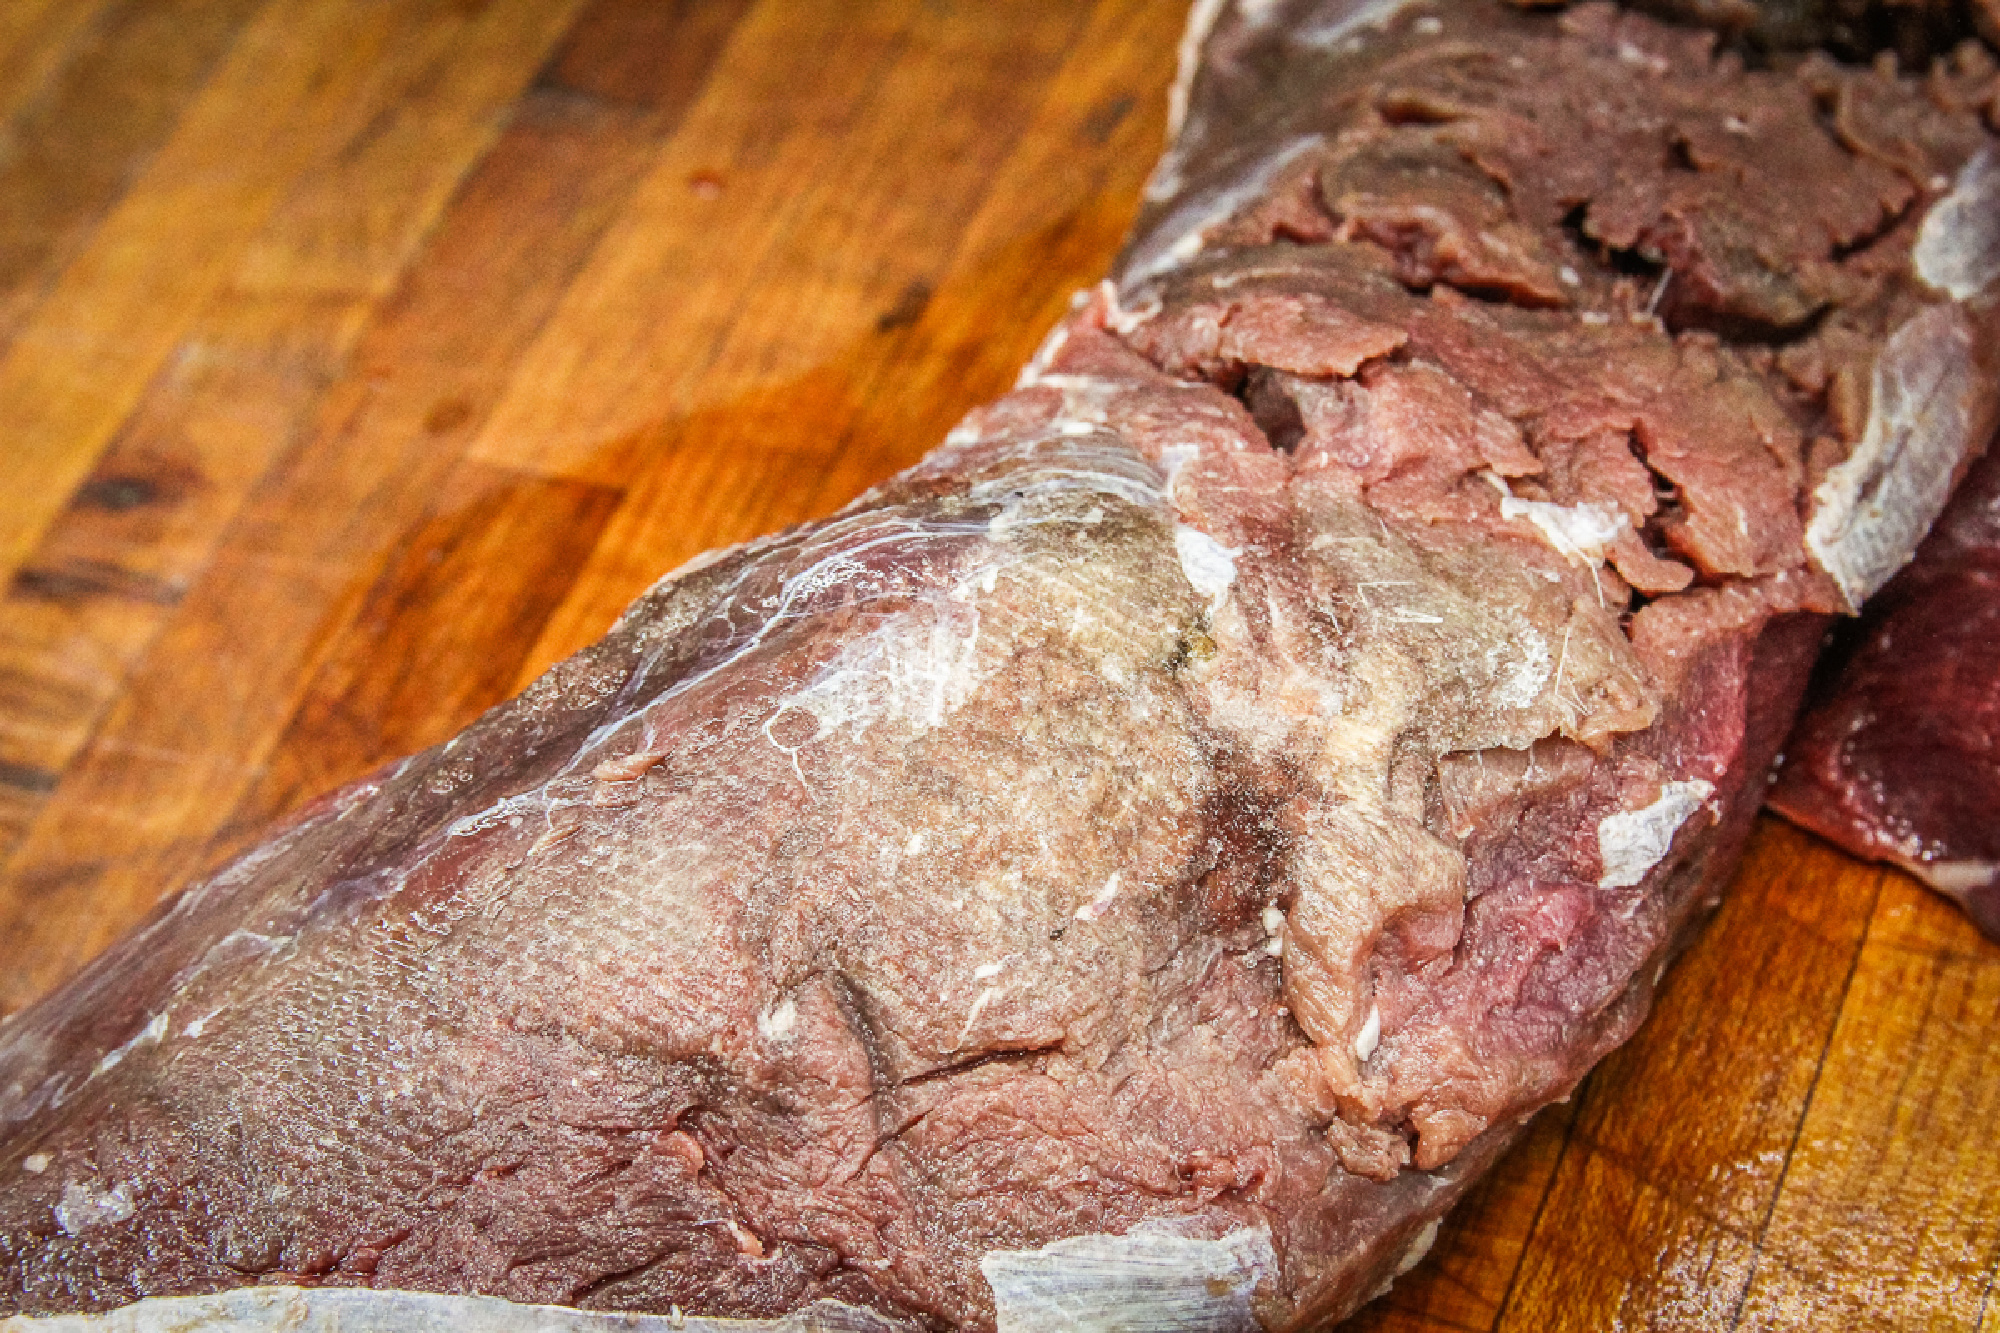 A section of meat shows signs of freezer burn.